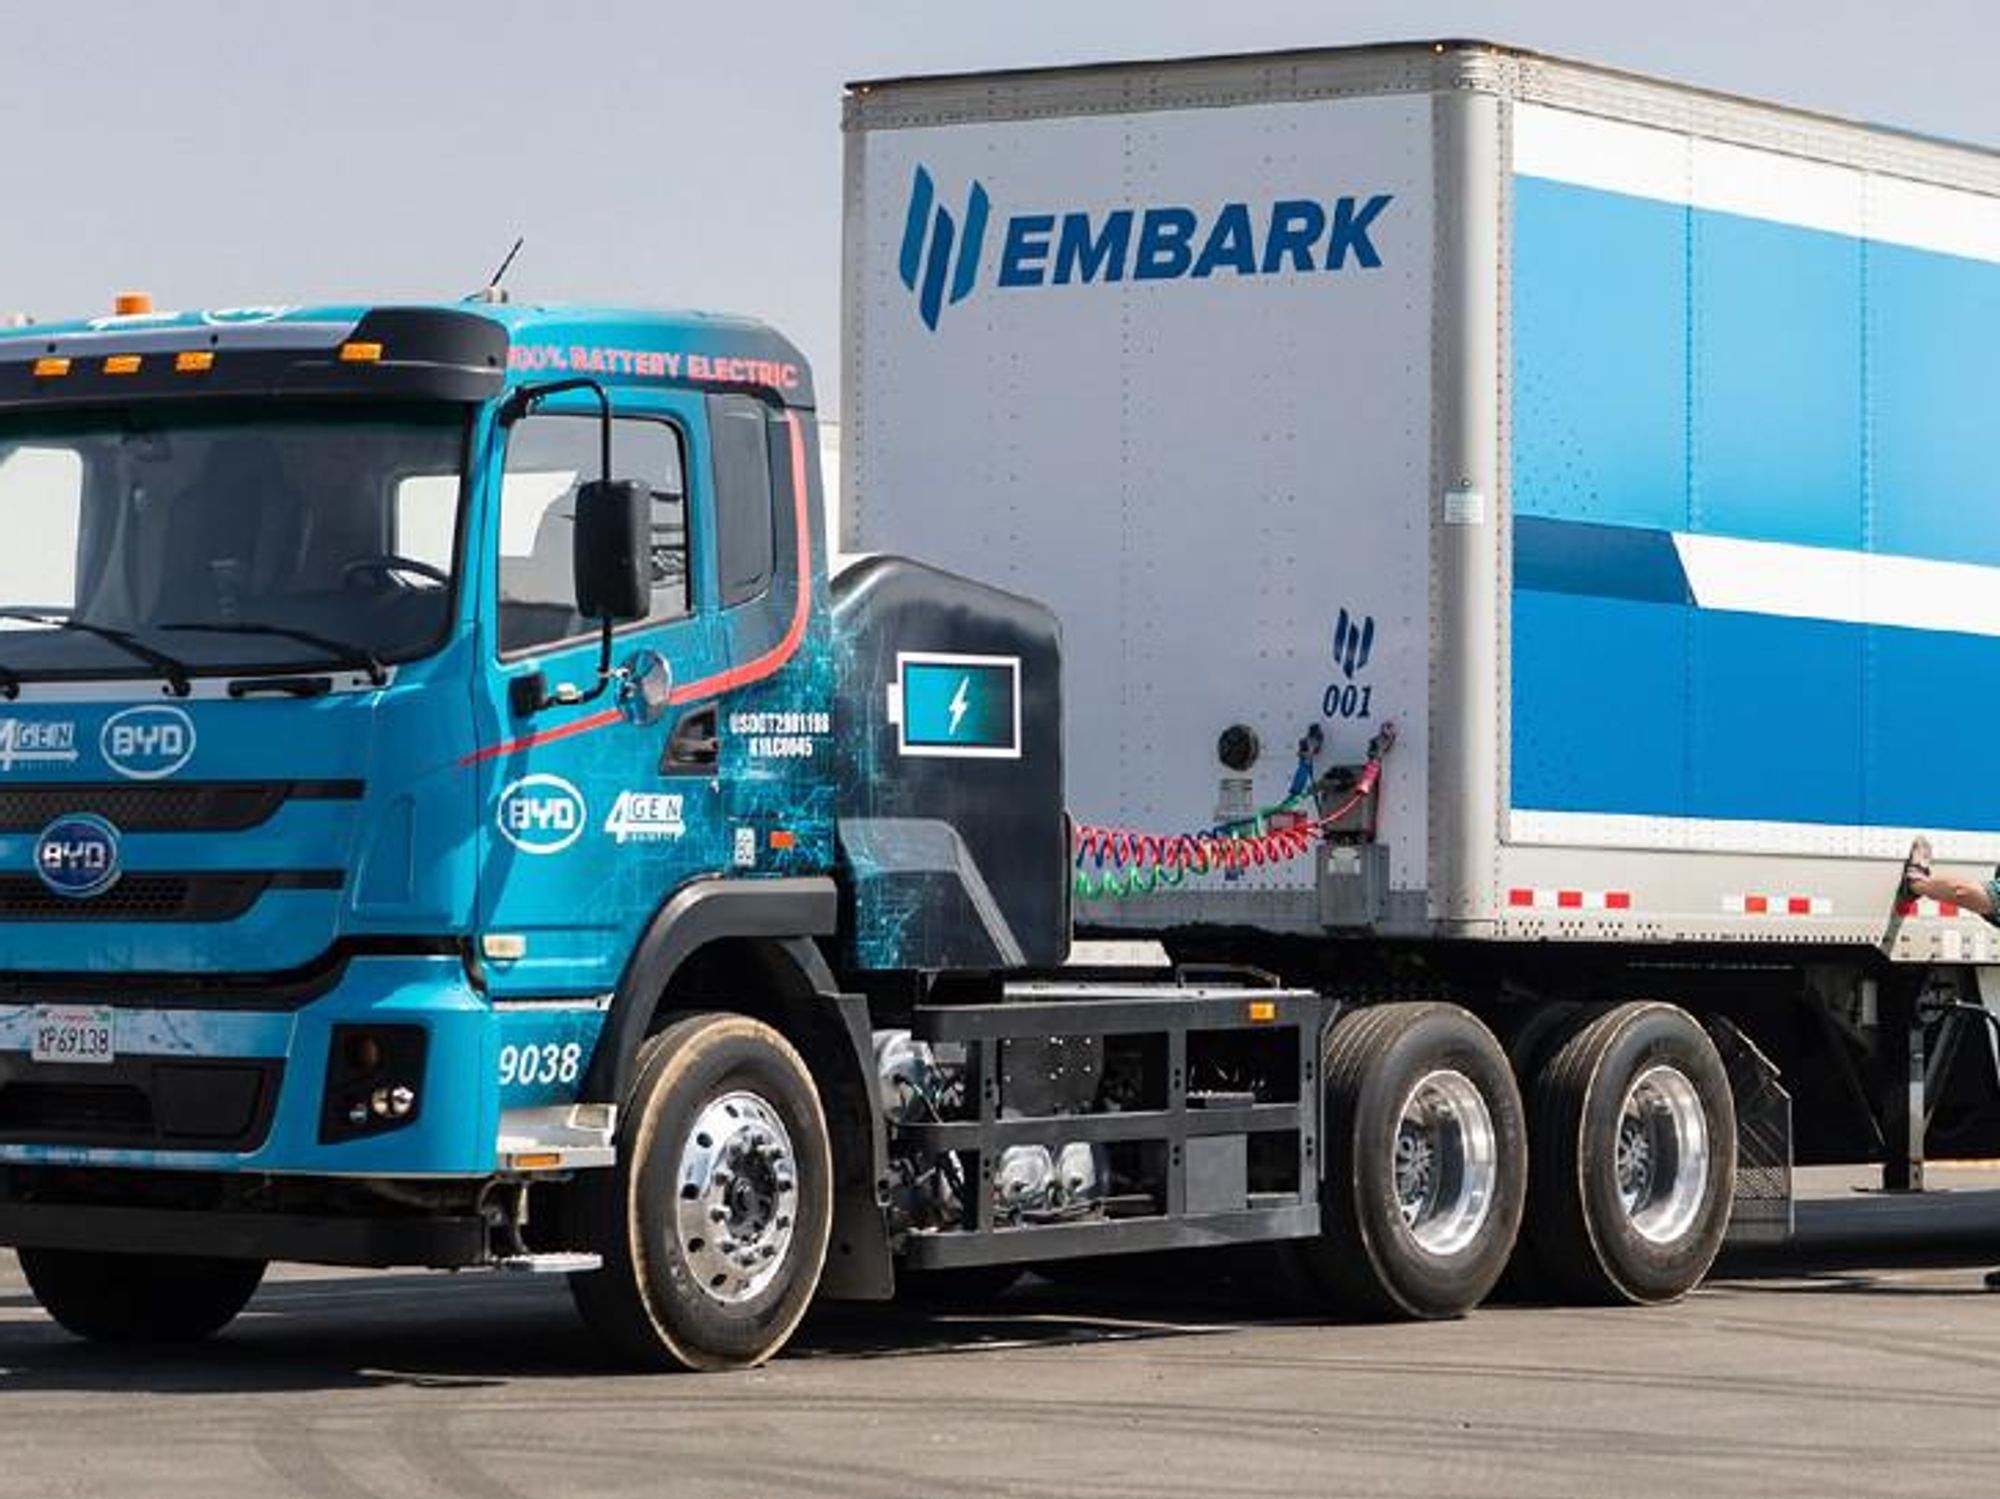 Electric on the Ends, Autonomous in the Middle: HP's Plan for a New EV Trucking Supply Chain